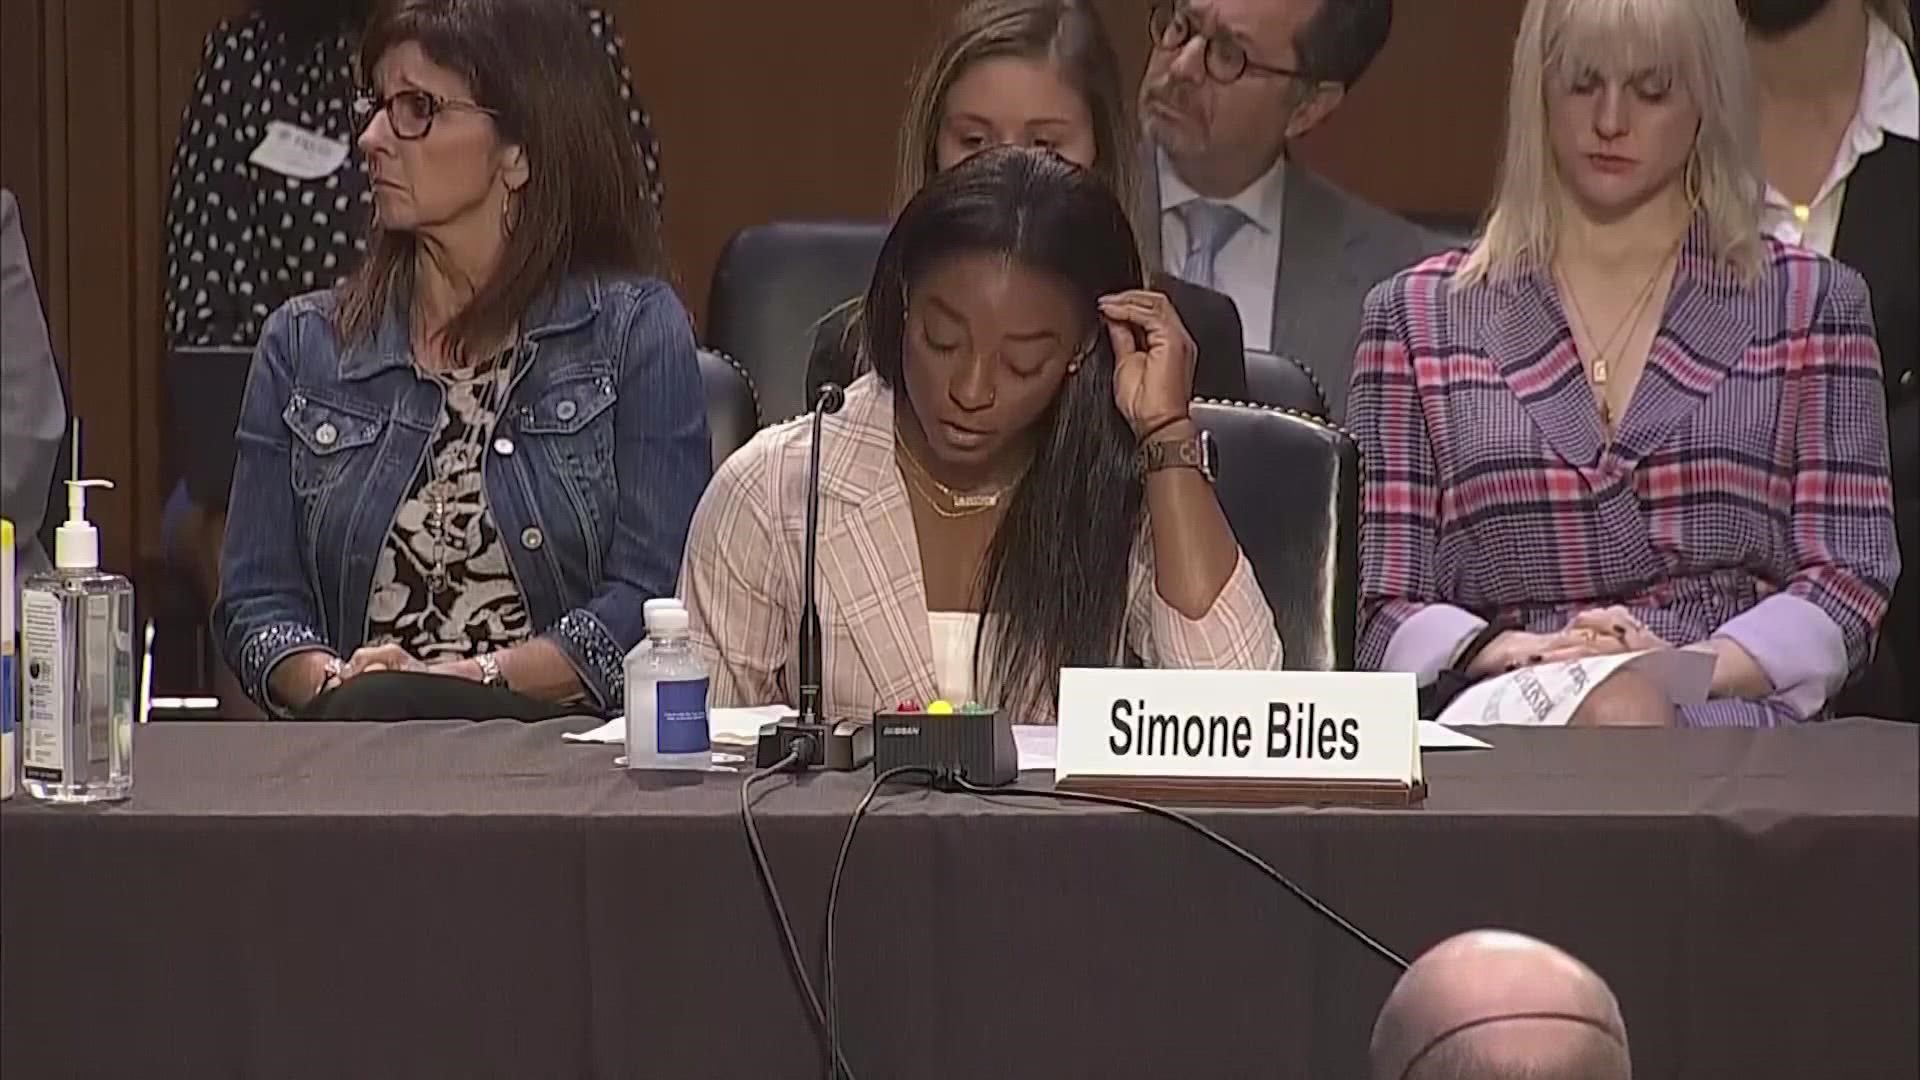 Simone Biles was among the gymnasts who testified on Capitol Hill Wednesday